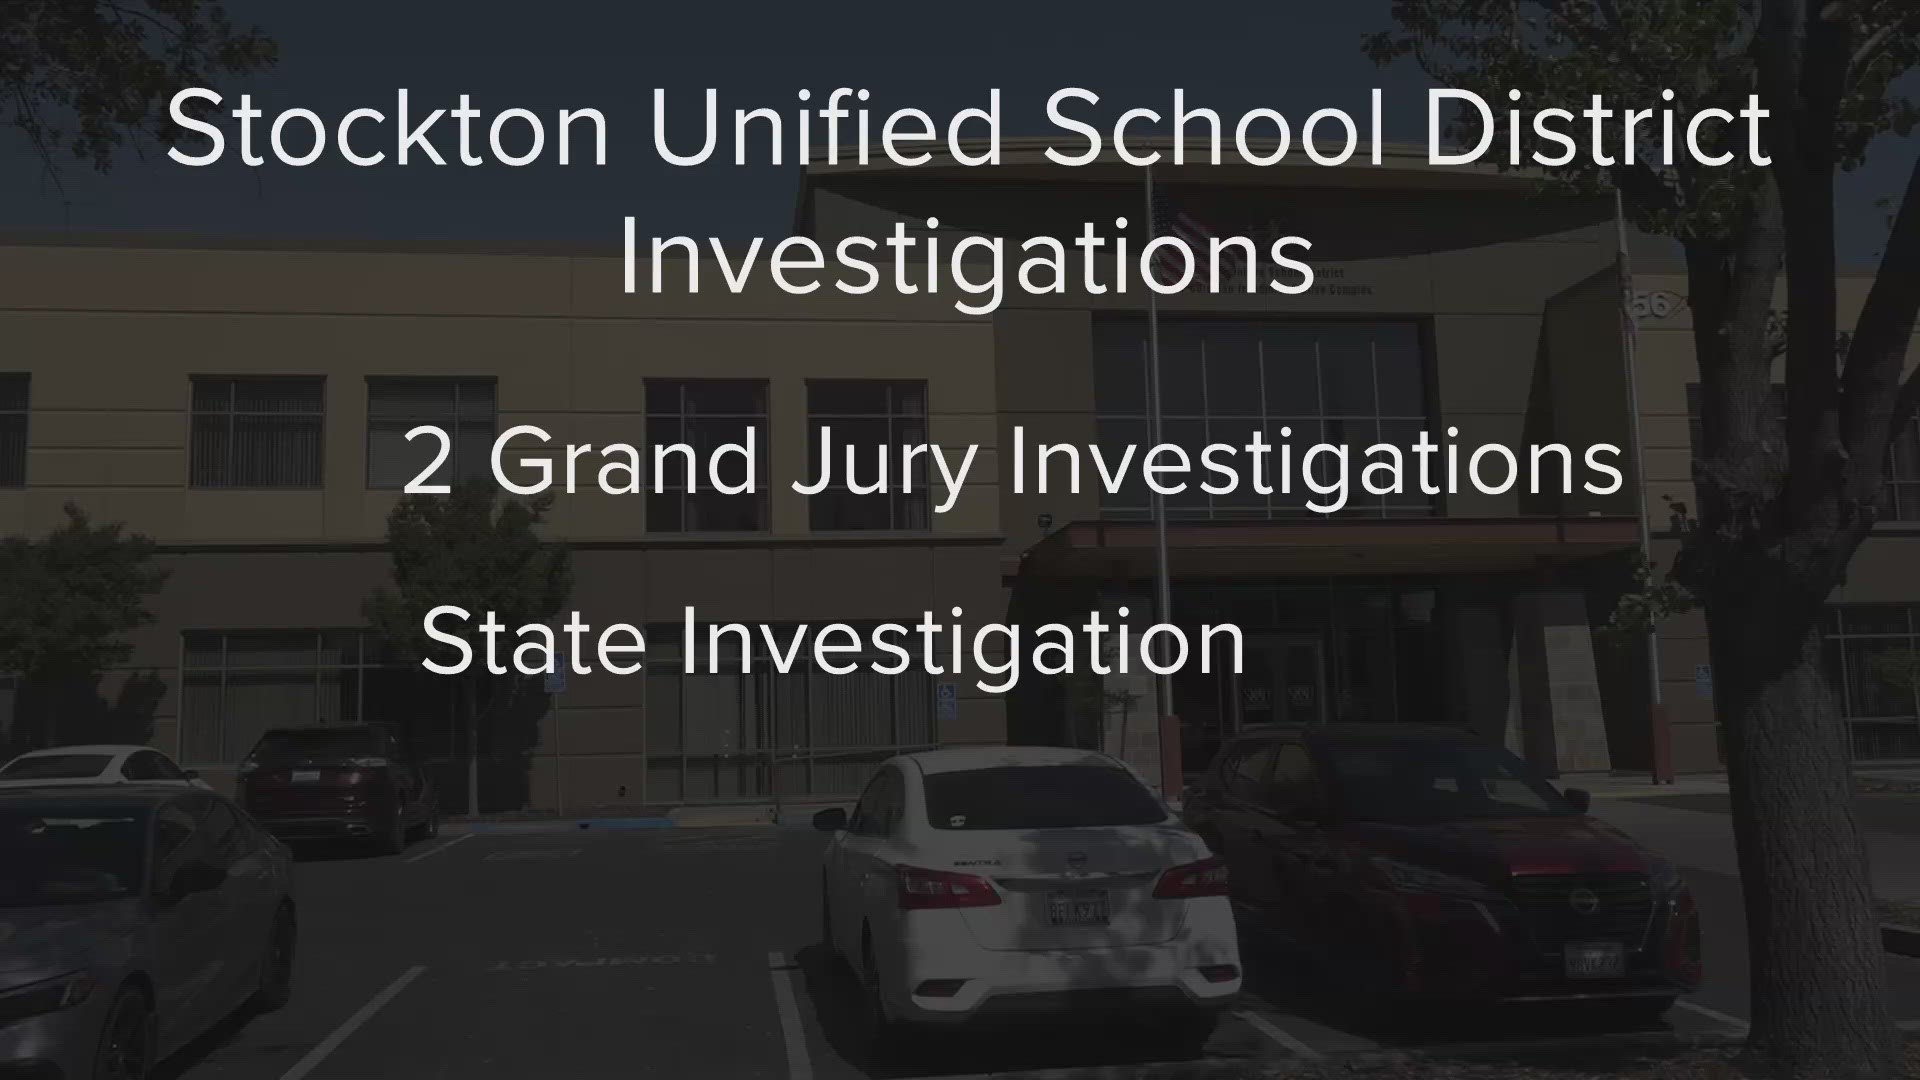 After two Grand Jury investigations, the San Joaquin County District Attorney is now looking into Stockton Unified over a scathing audit alleging fraud.